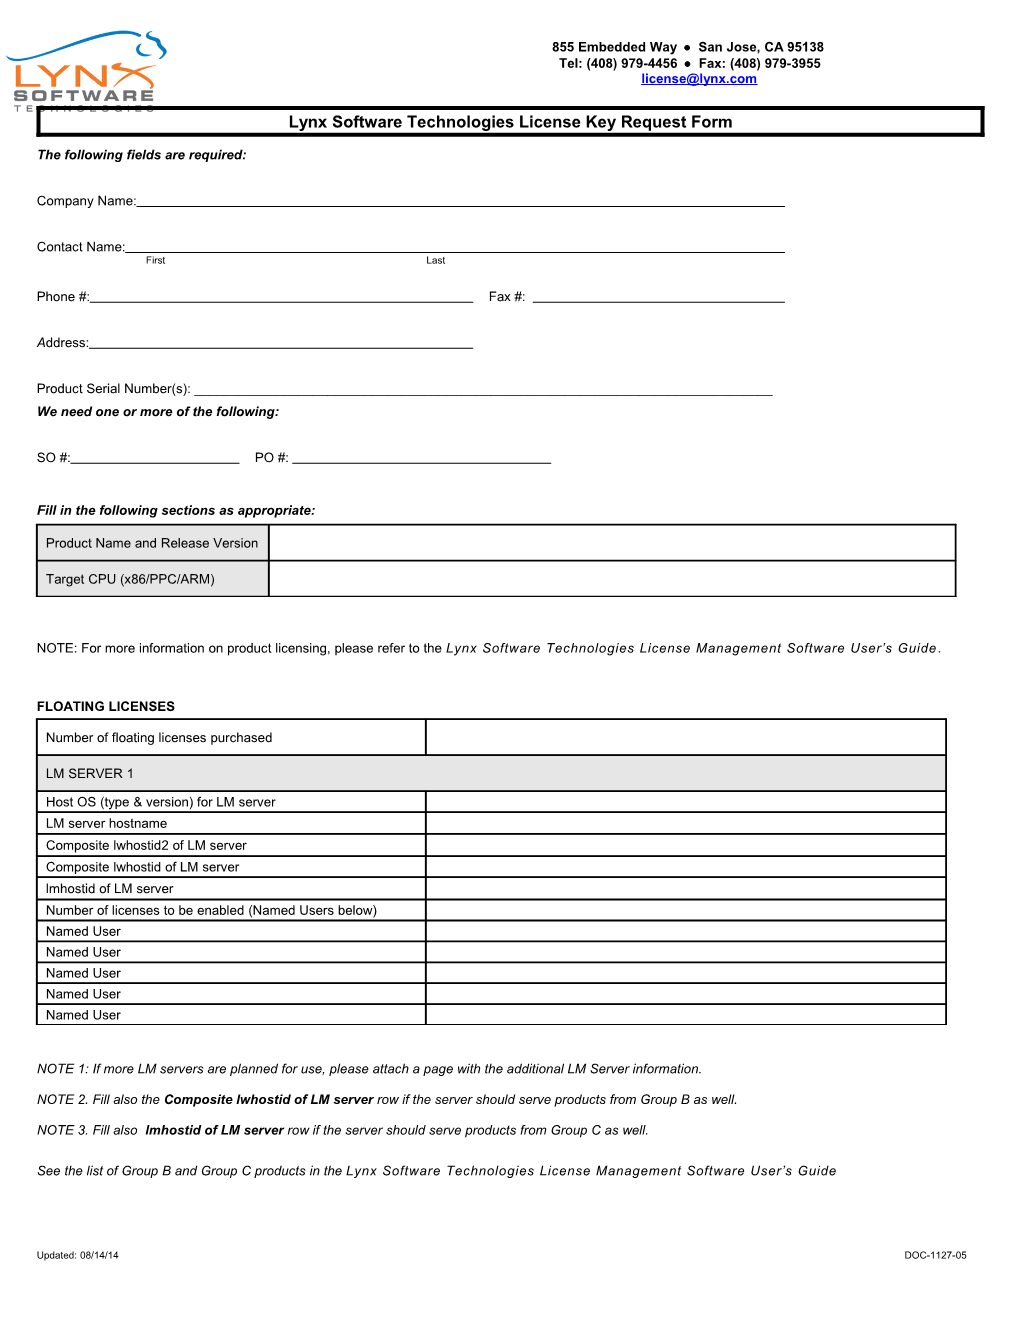 Lynx Software Technologies License Key Request Form